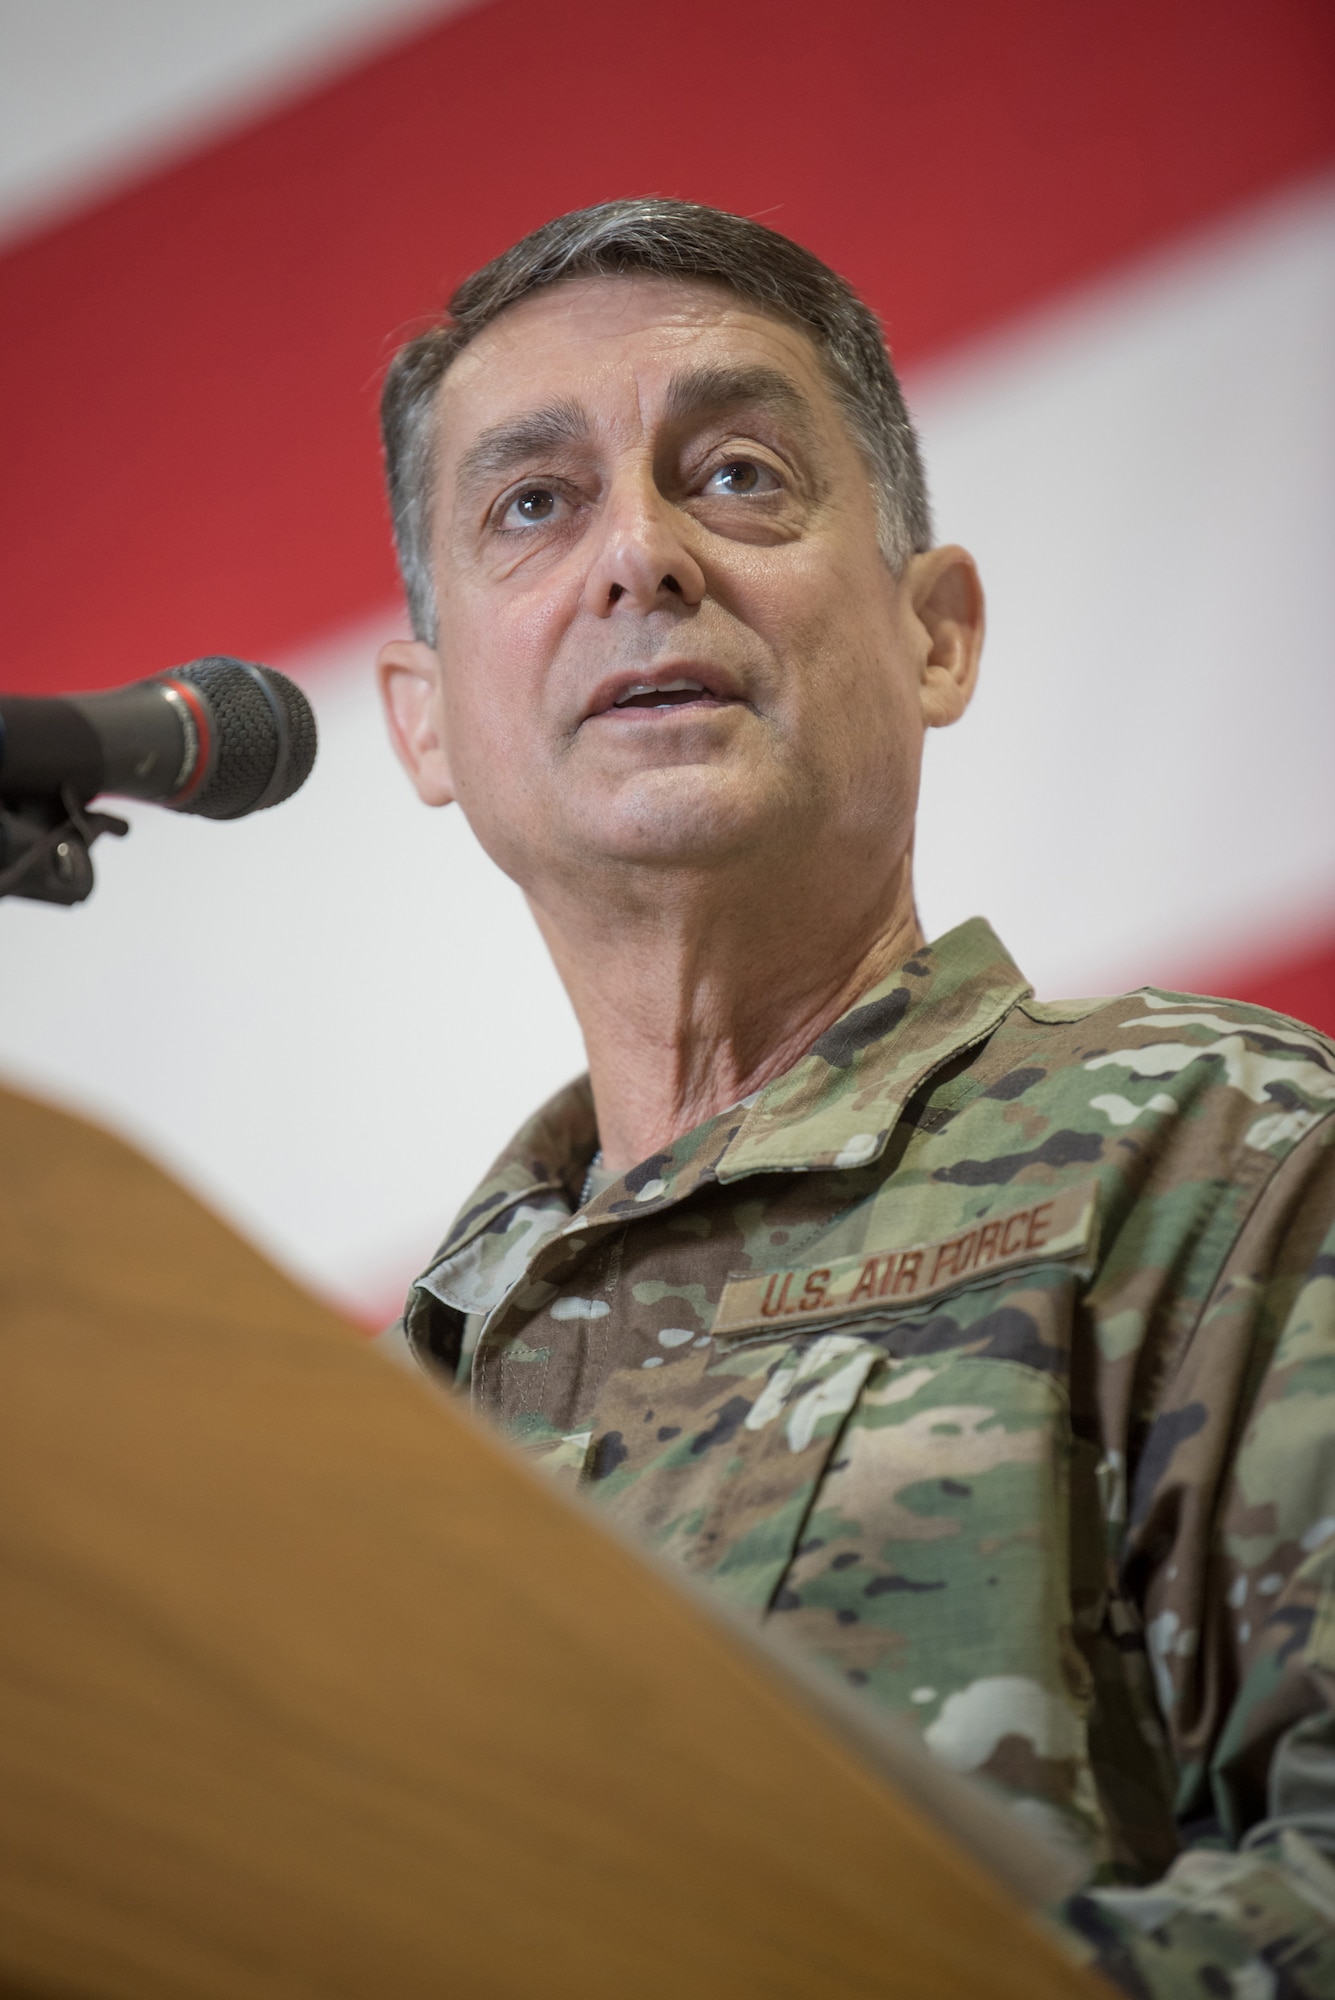 Brig. Gen. Warren Hurst, the outgoing assistant adjutant general for Air, Kentucky, speaks during a transfer-of-responsibility ceremony at the Kentucky Air National Guard Base in Louisville, Ky., Aug. 11, 2019. Taking his place as Kentucky’s next assistant adjutant general for Air is Brig. Gen. Jeffrey Wilkinson. (U.S. Air National Guard photo by Staff Sgt. Joshua Horton)